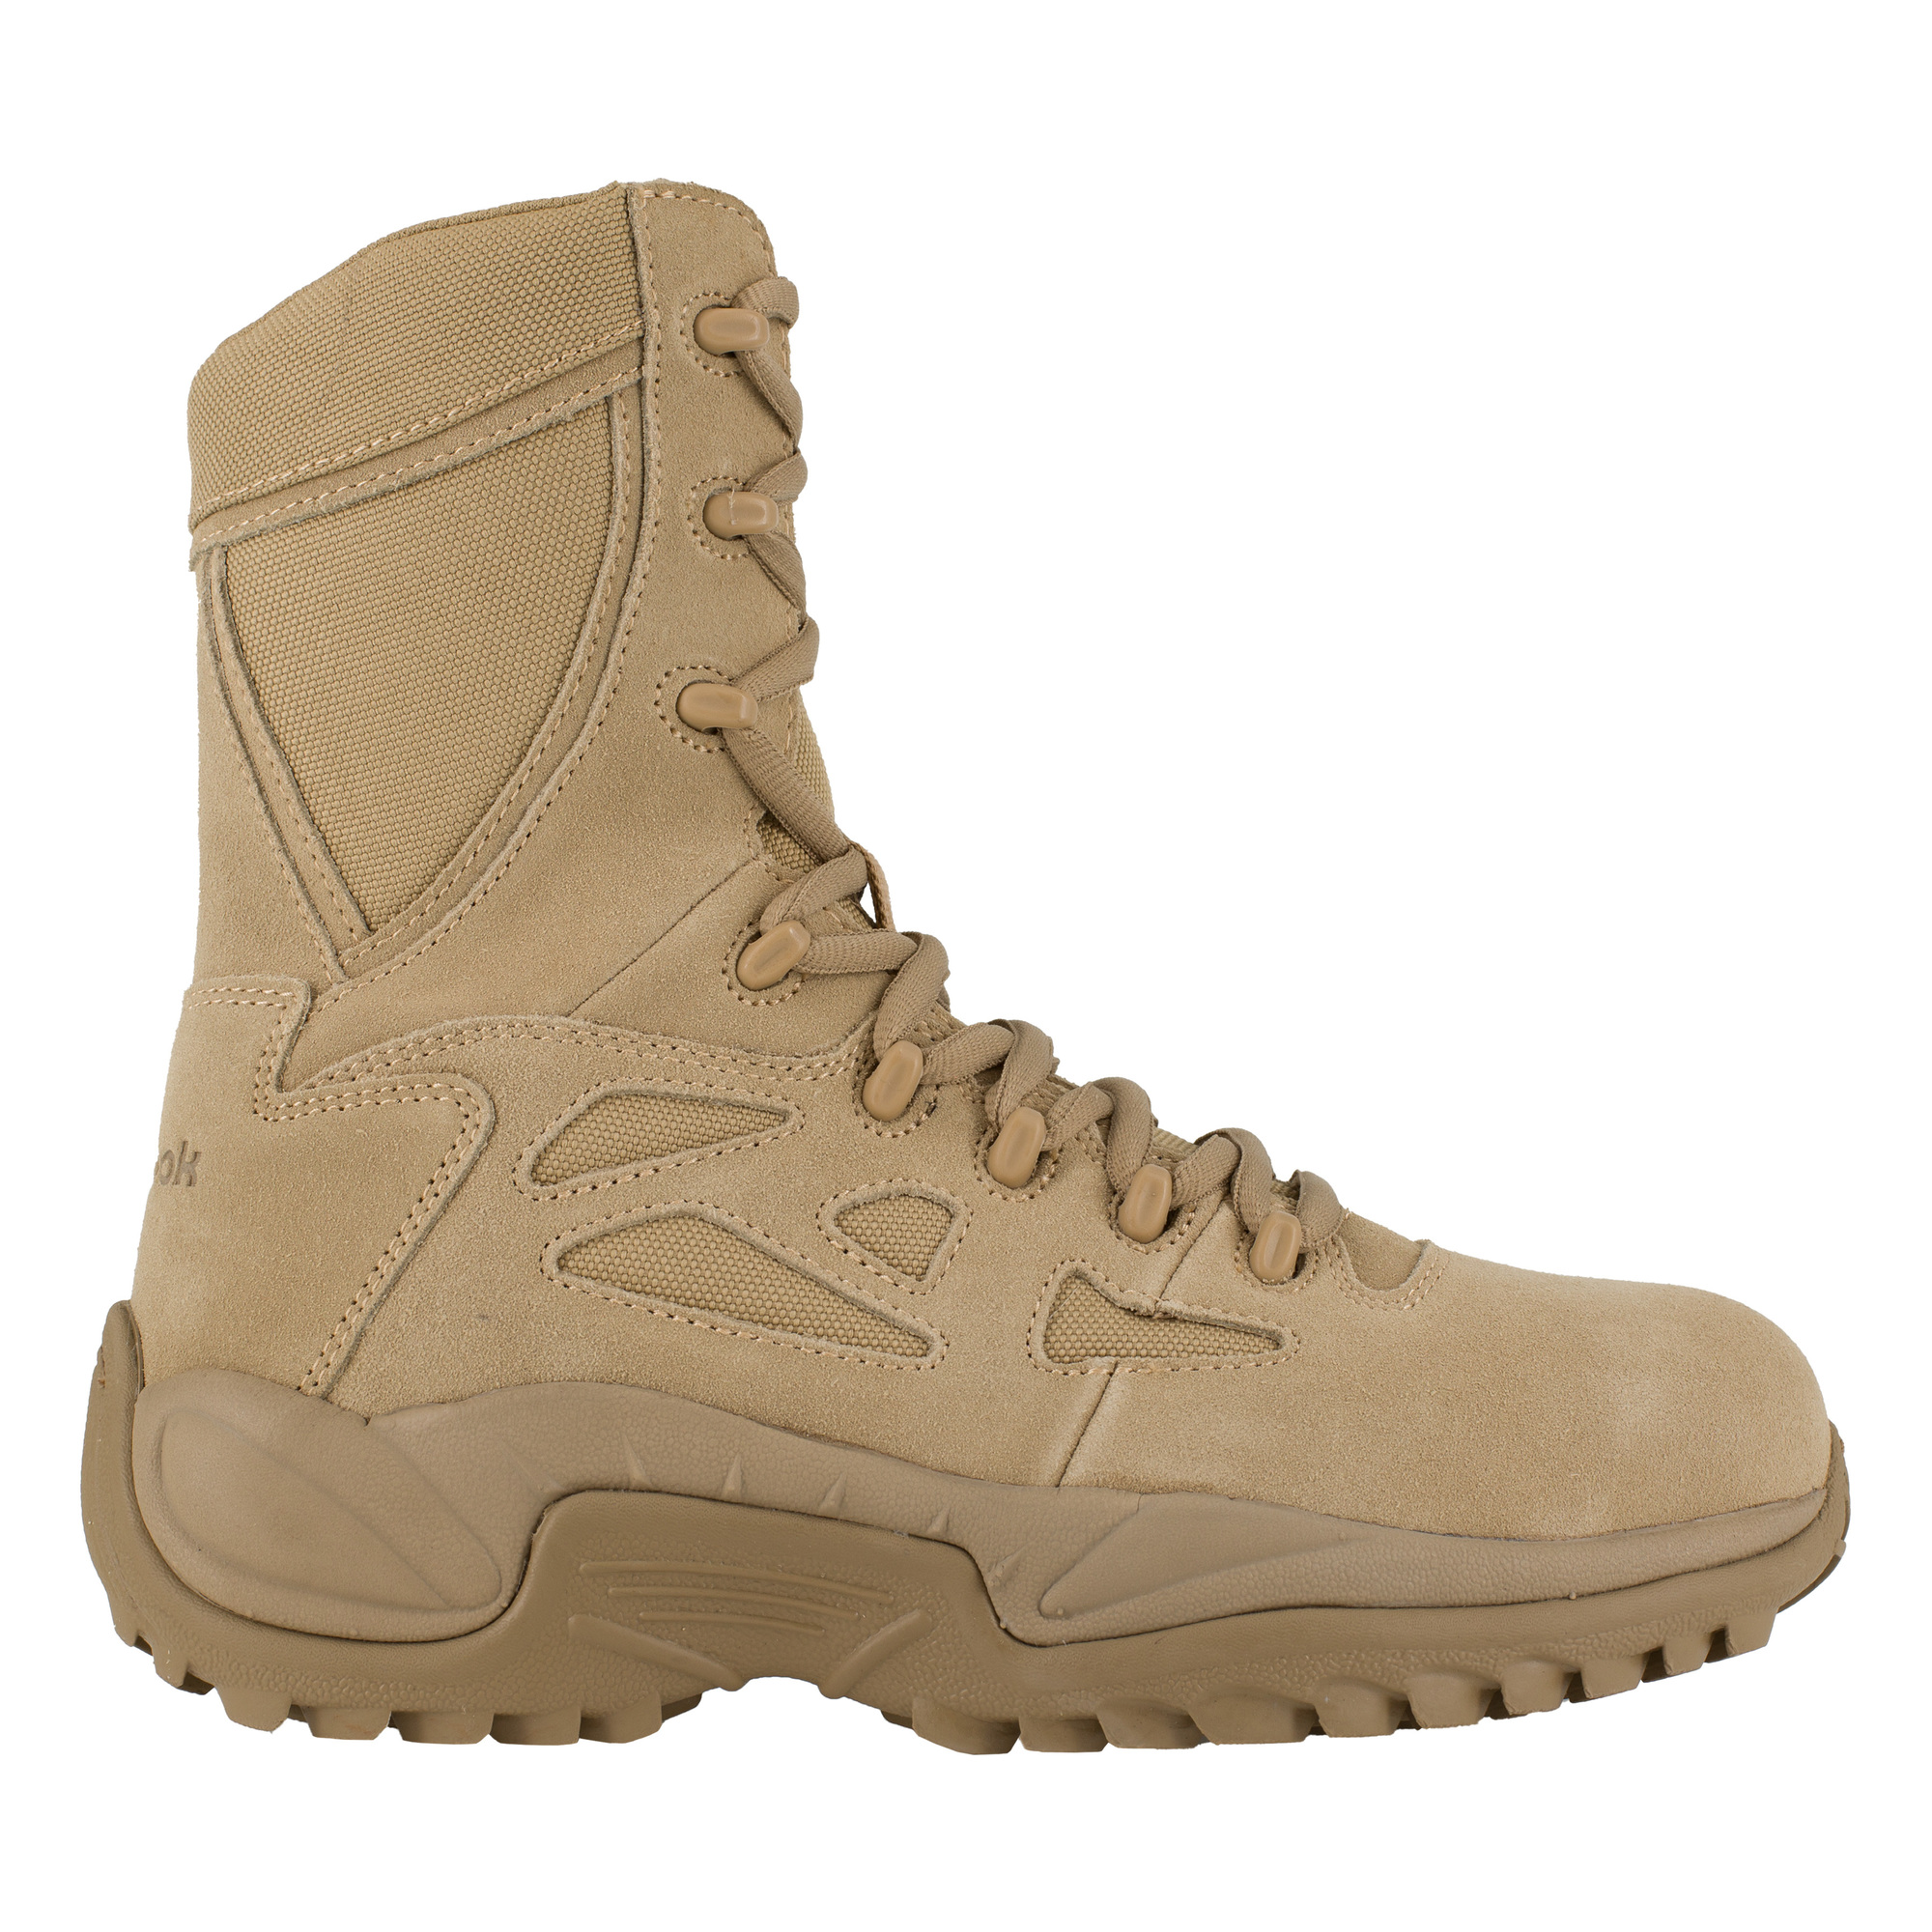 Reebok, 8Inch Stealth Tactical Boot with Side Zipper, Size 7 1/2, Width Wide, Color Desert Tan, Model RB894 -  RB894-W-07.5